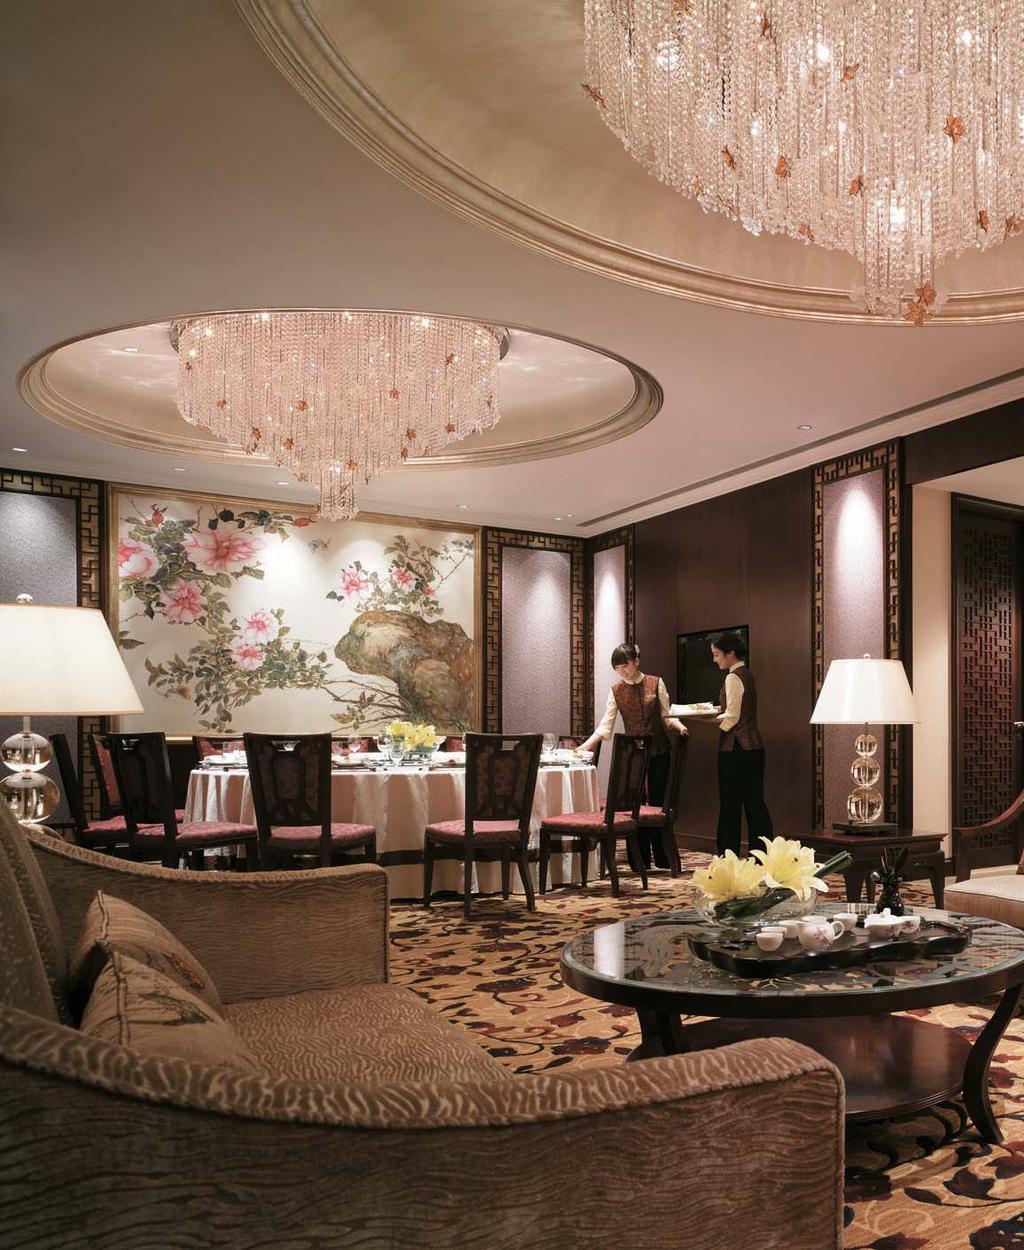 true to its legendary fame, the suckling pig was roasted to a golden crisp, glistening invitingly under the crystal chandelier at Shang Palace.